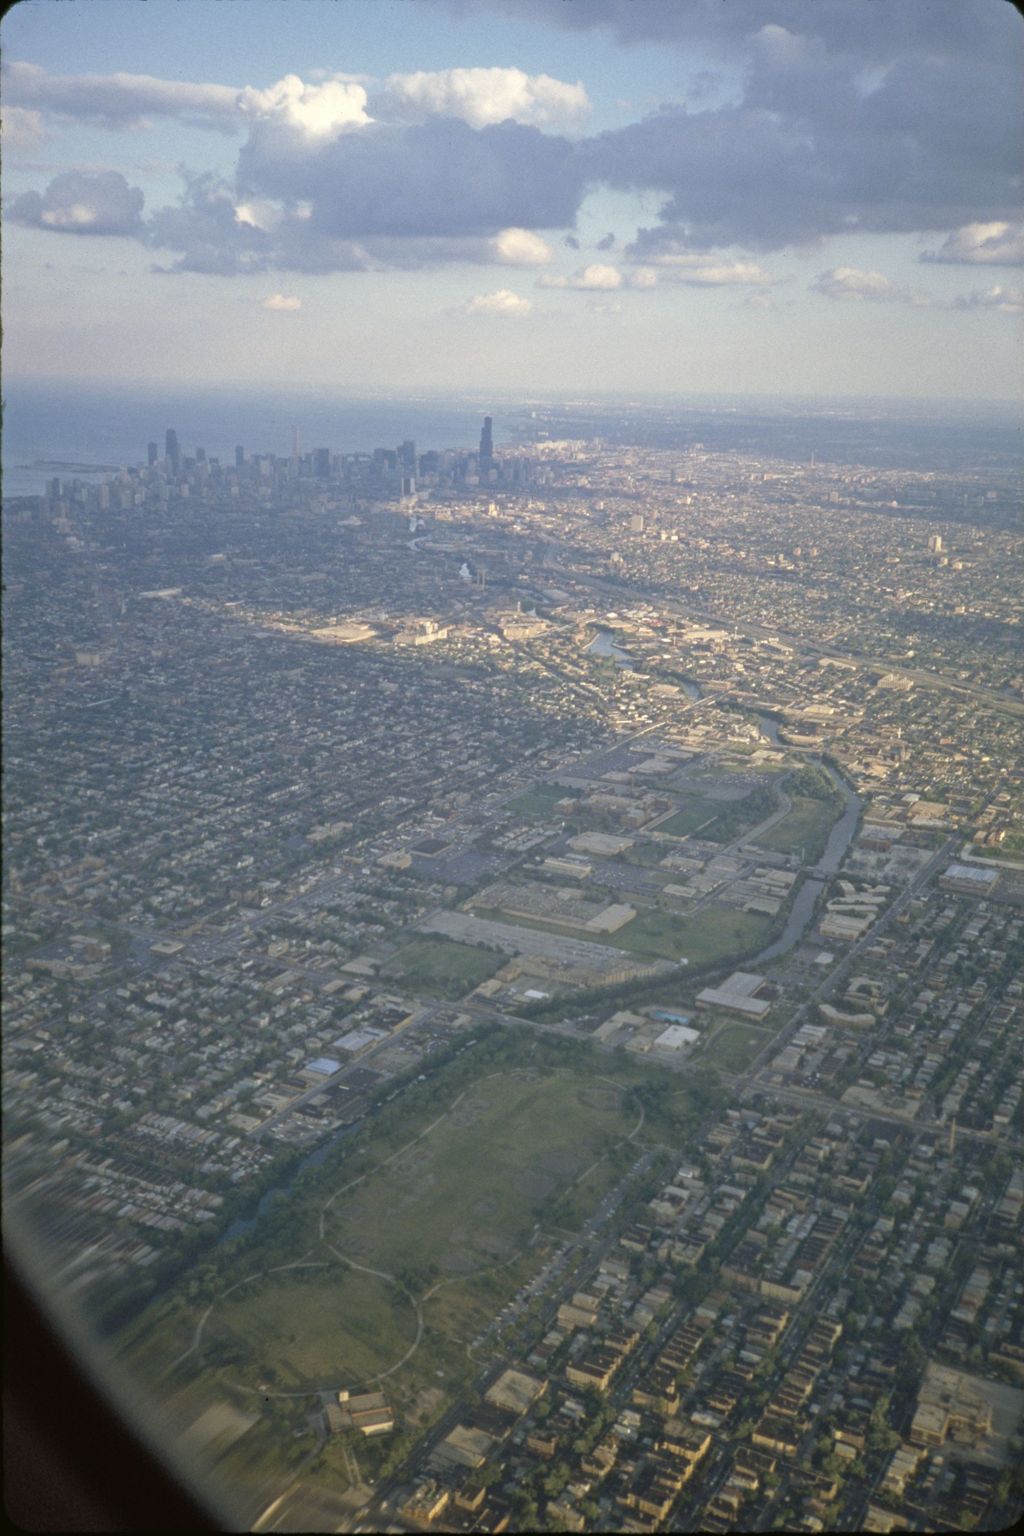 North Branch of the Chicago River from the air